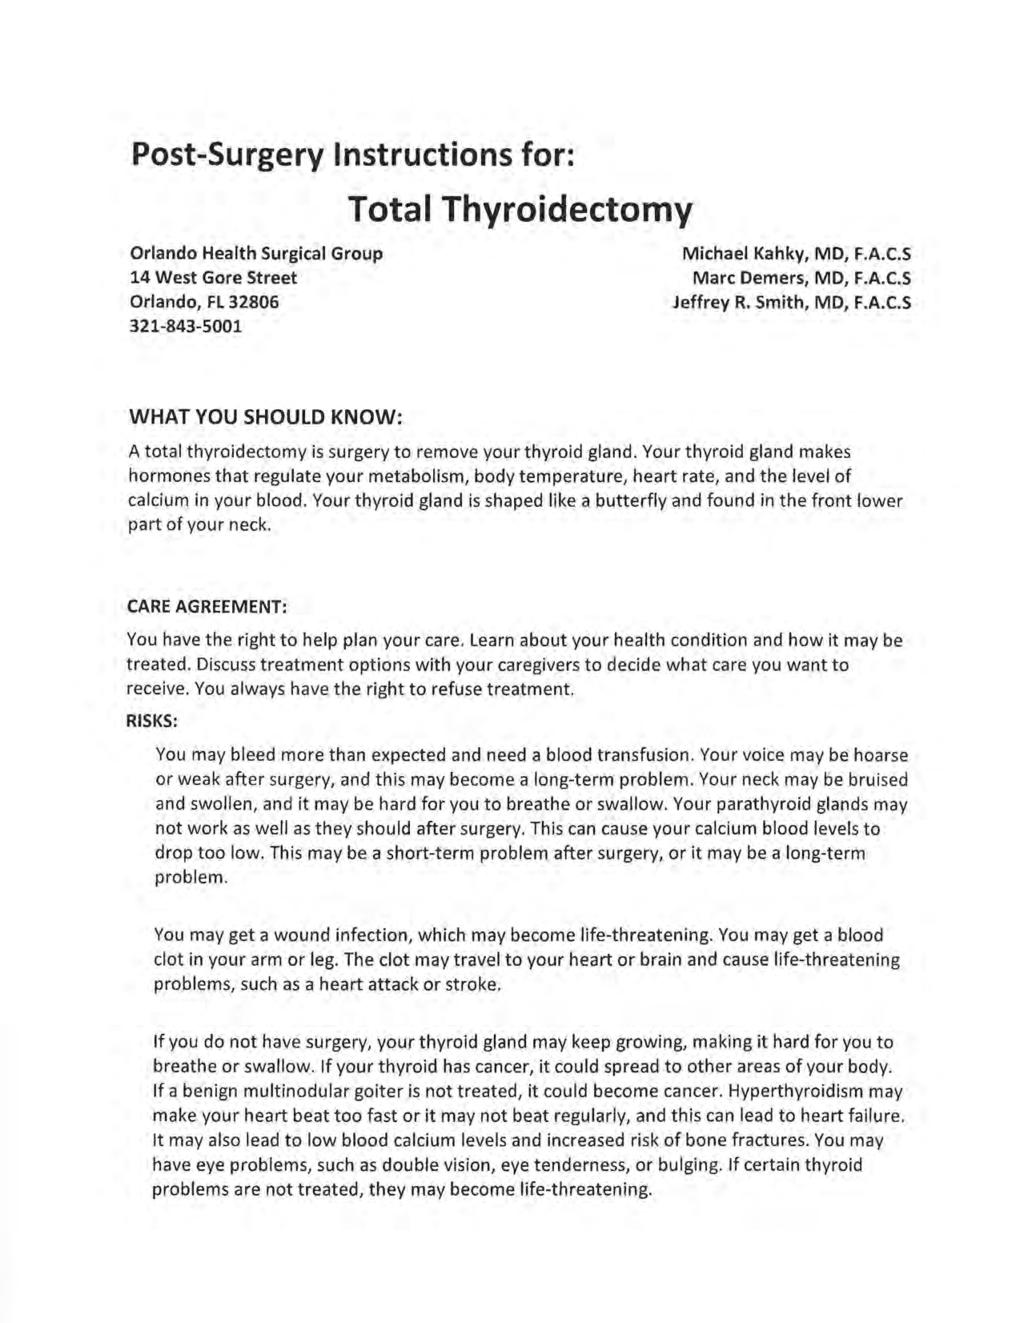 Post-Surgery Instructions for: Orlando Health Surgical Group 14 West Gore Street Orlando, FL 32806 321-843-5001 Total Thyroidectomy Michael Kahky, MD, F.A.C.S Marc Demers, MD, F.A.C.S Jeffrey R.